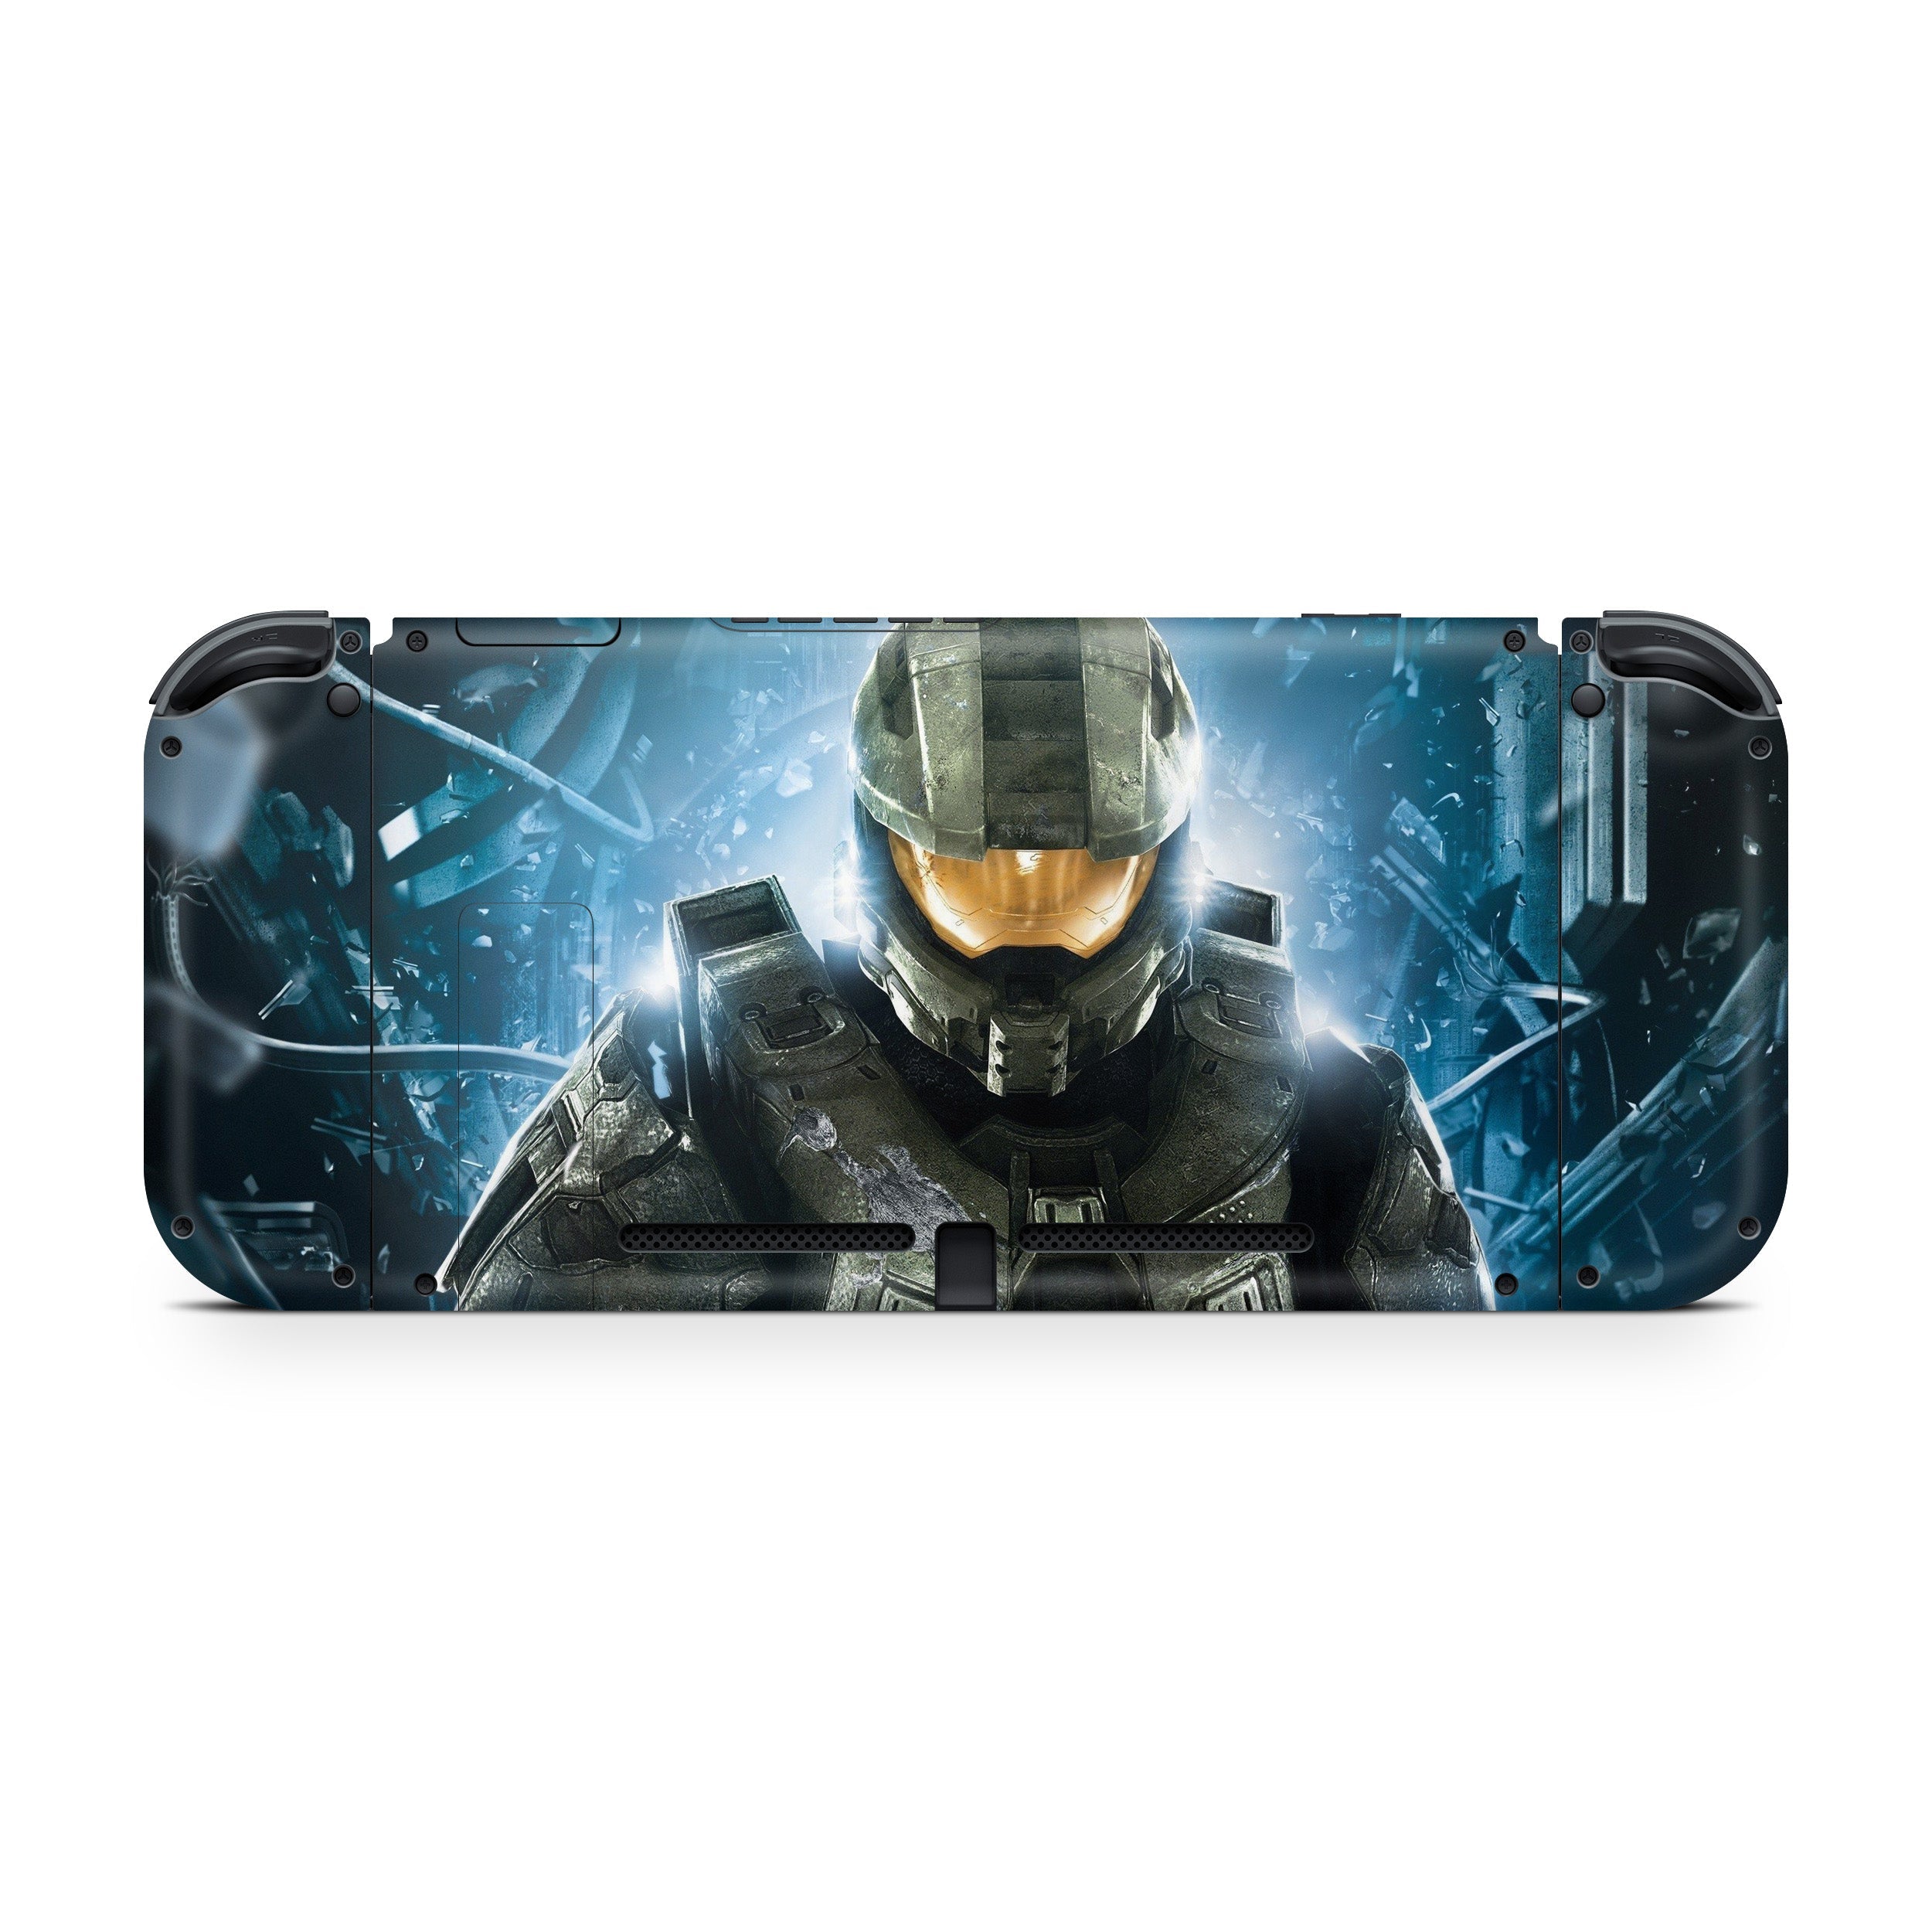 A video game skin featuring a Halo design for the Nintendo Switch.